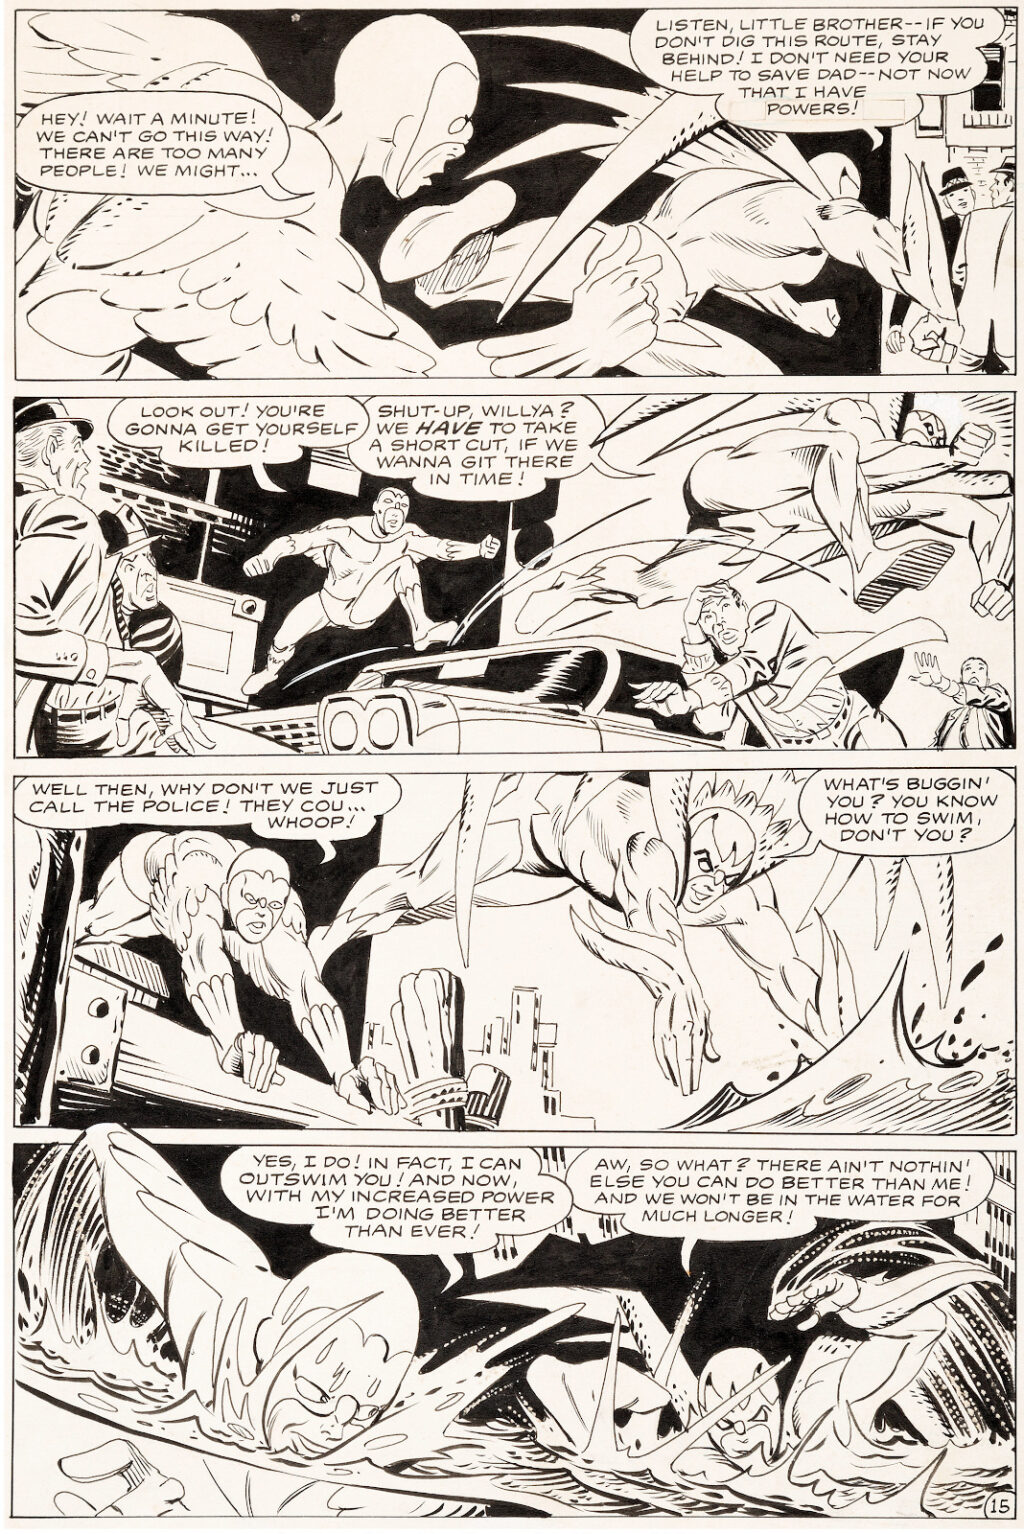 Showcase issue 75 page 15 by Steve Ditko